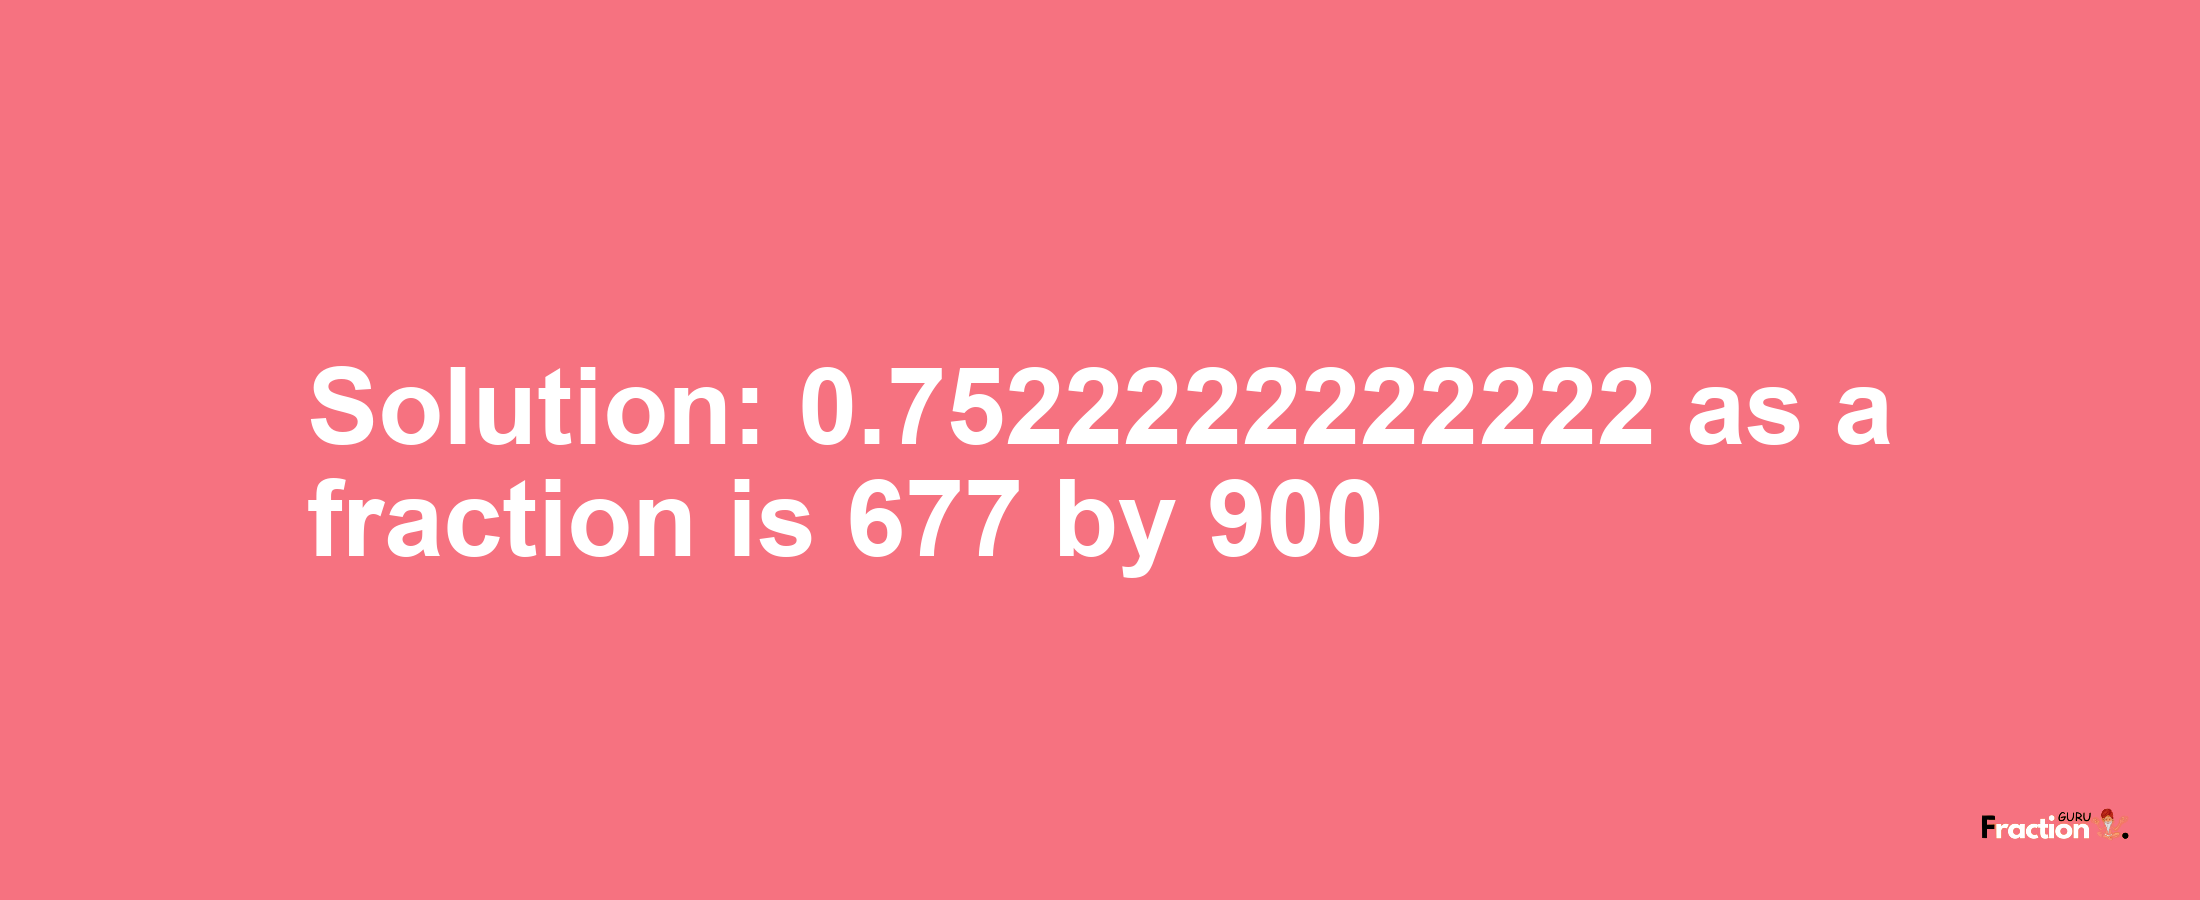 Solution:0.7522222222222 as a fraction is 677/900